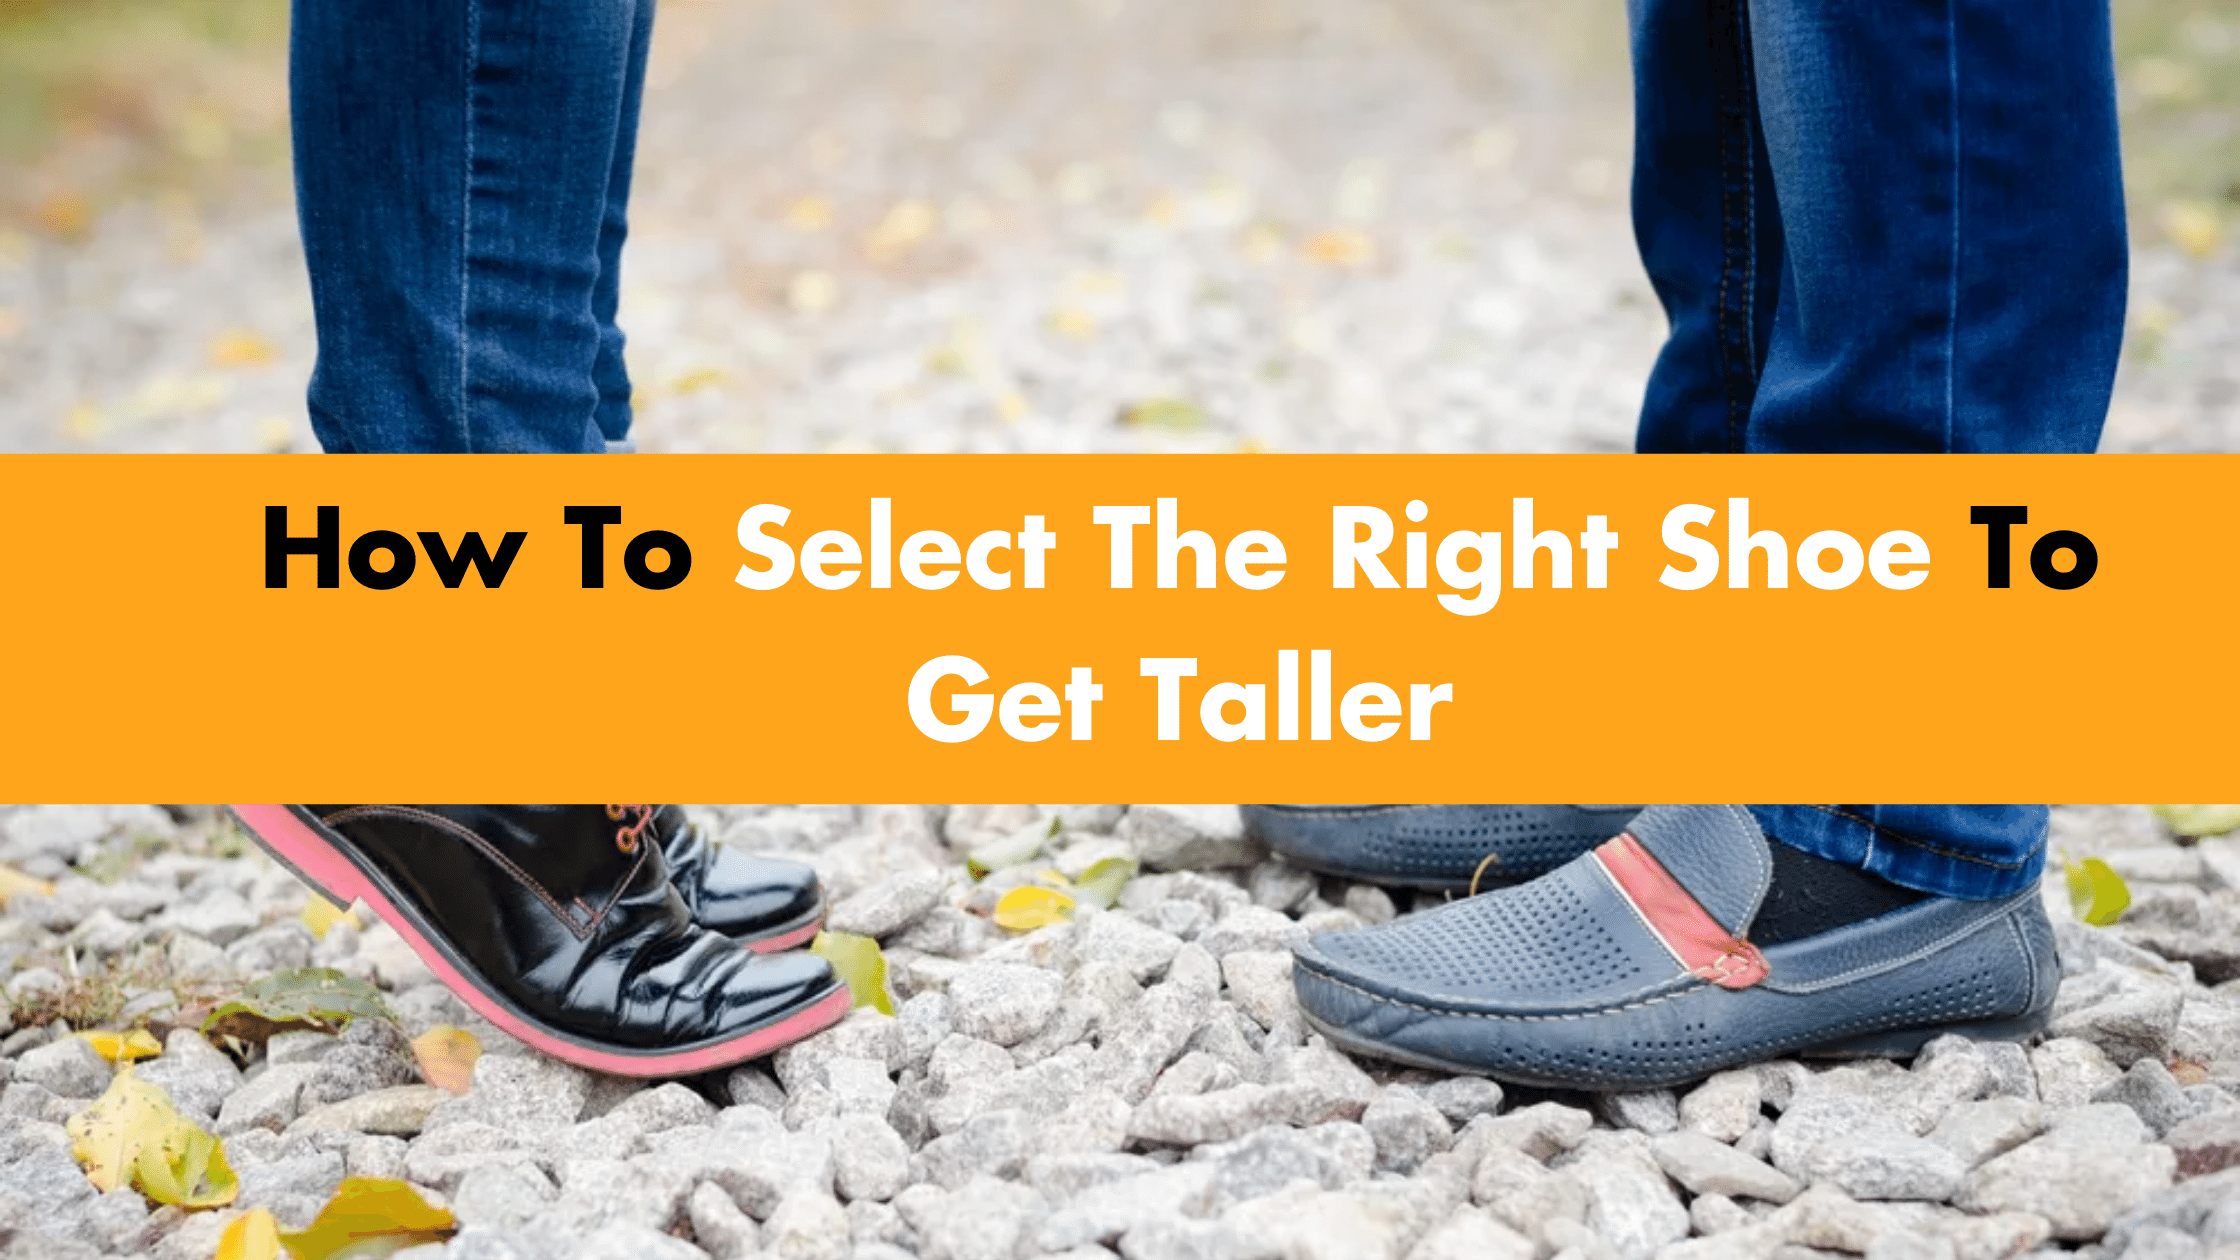 How To Select The Right Shoe To Get Taller?